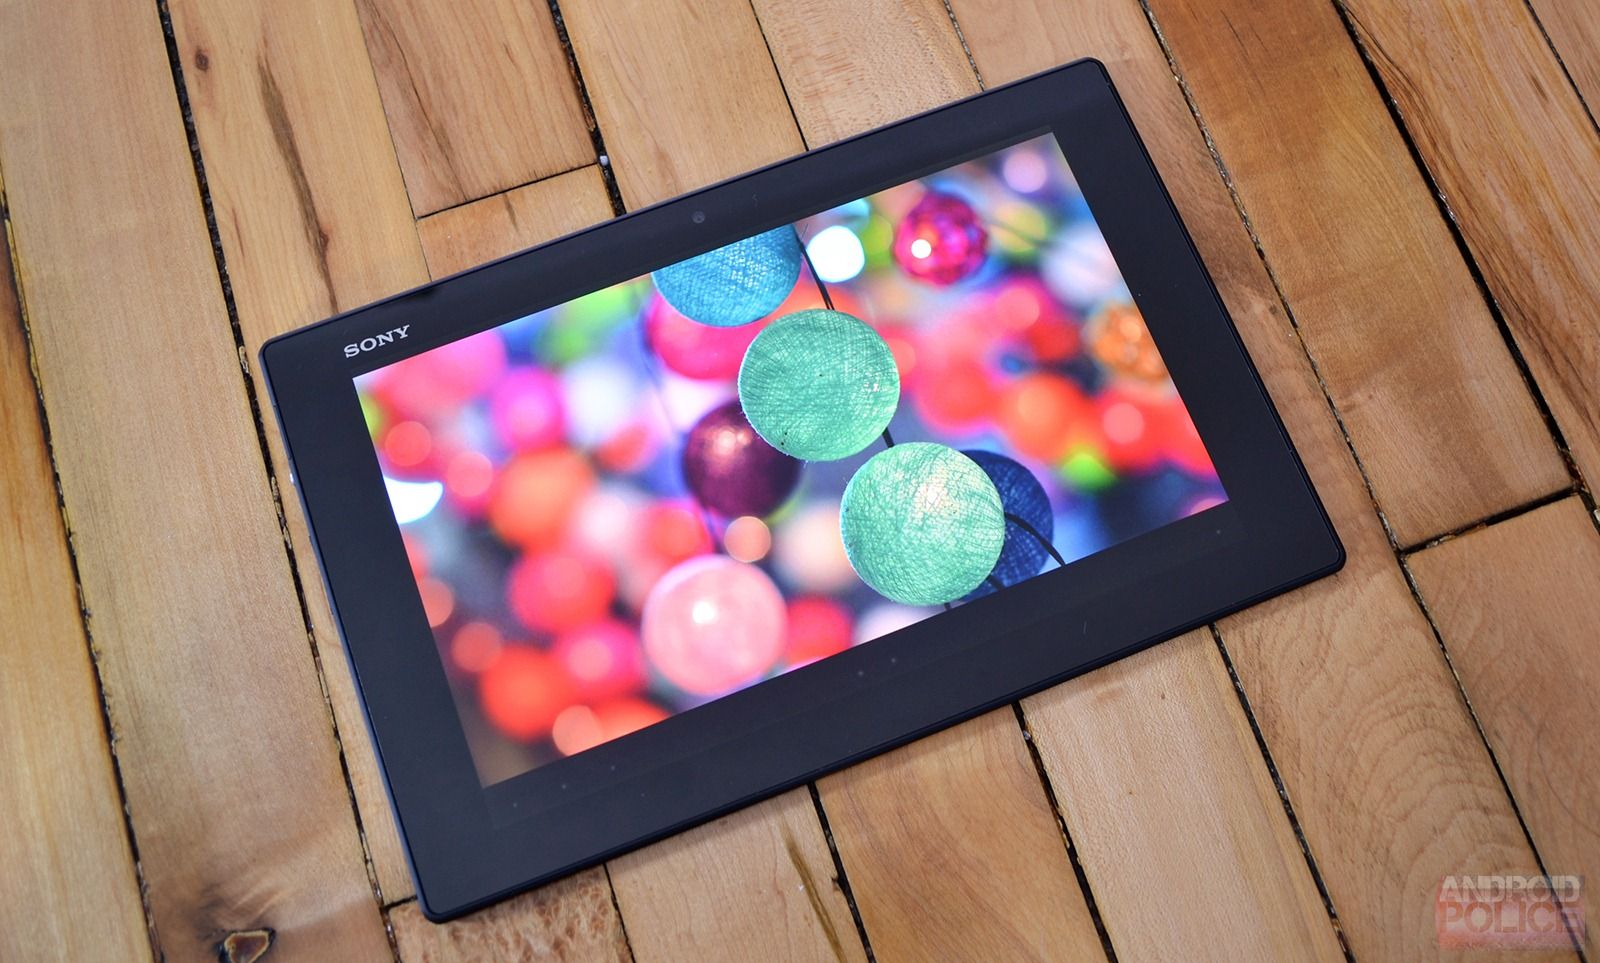 Sony Xperia Tablet Z LTE (SGP321) Receives Android 4.2.2 Update, Gets A